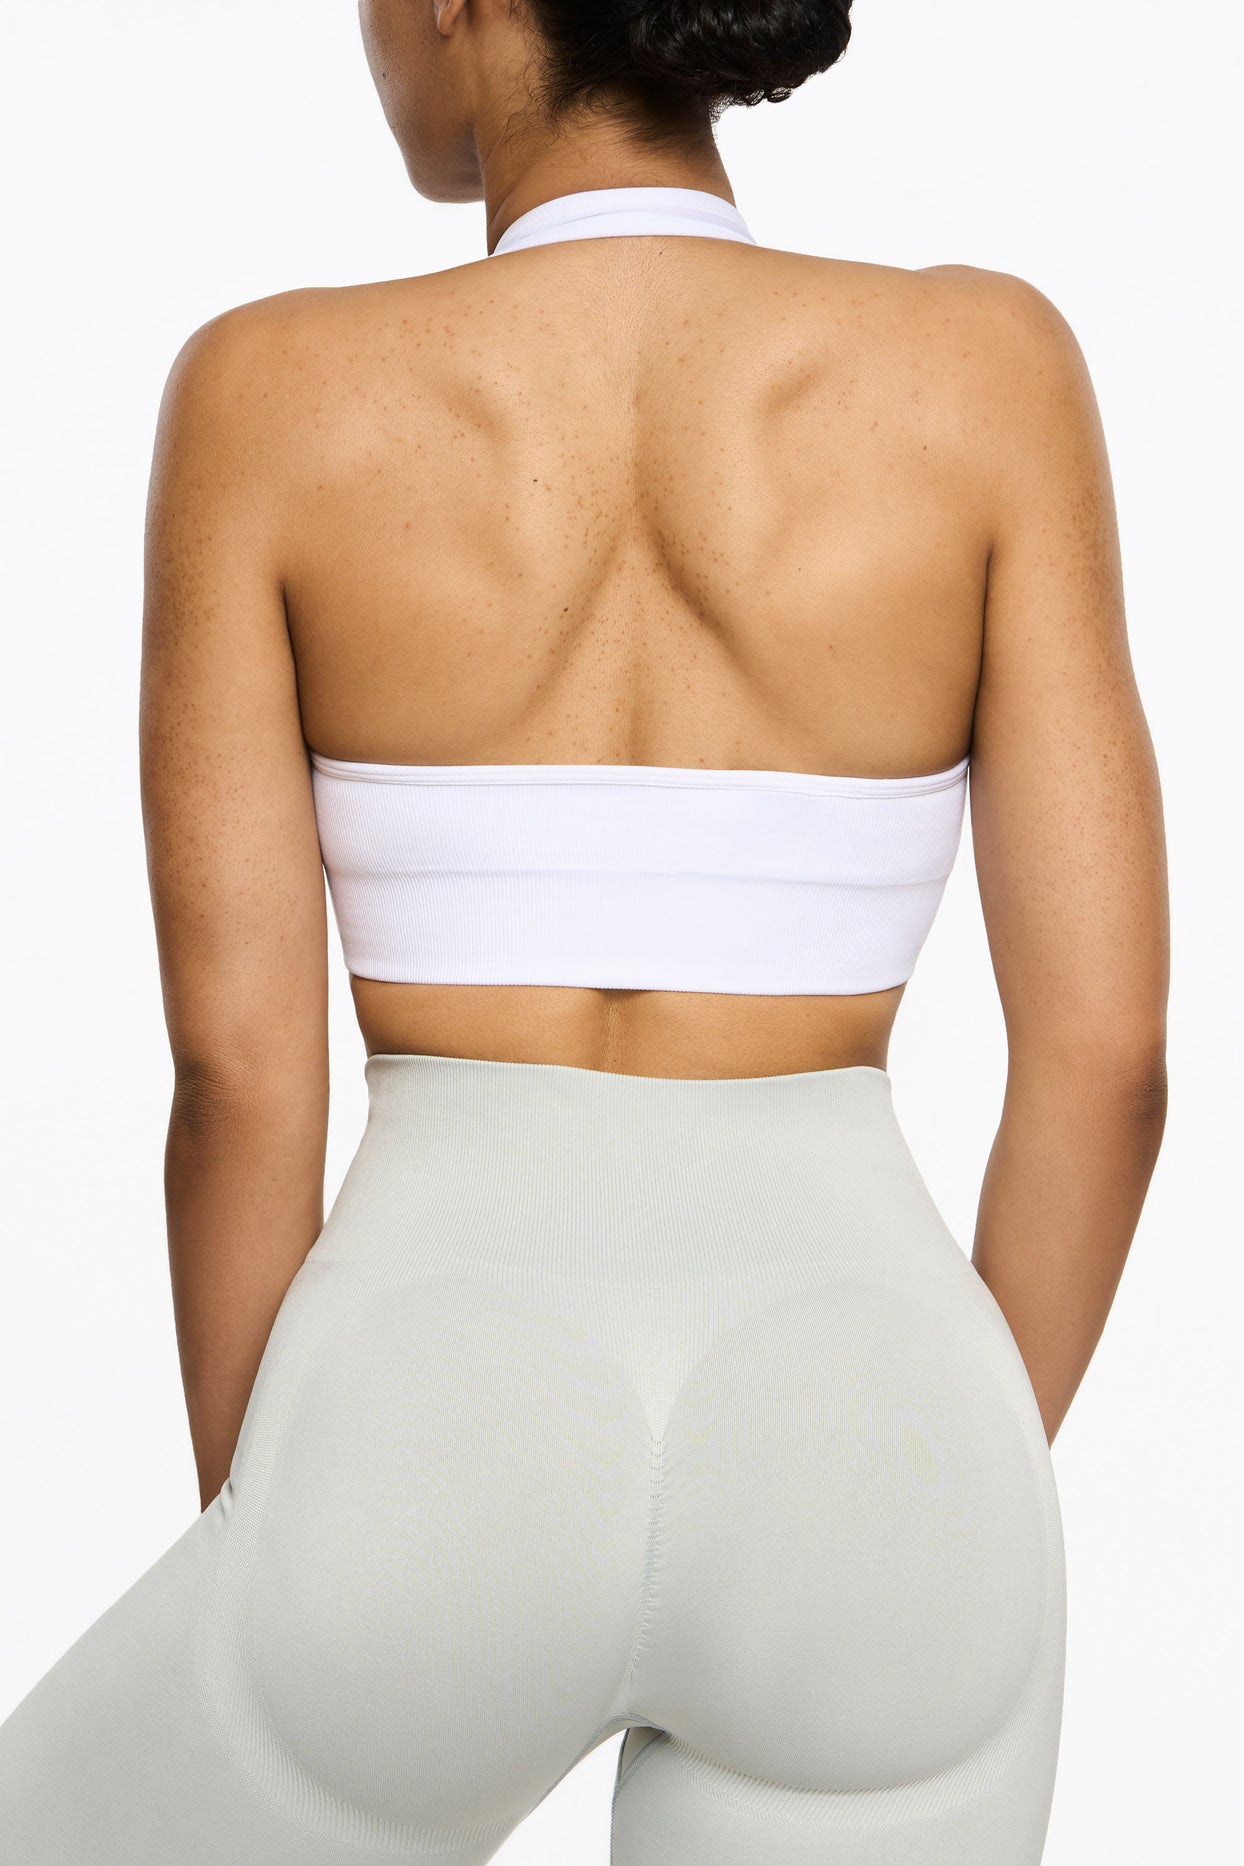 Tala New Halter Top Sports Bra White - $16 New With Tags - From Kay